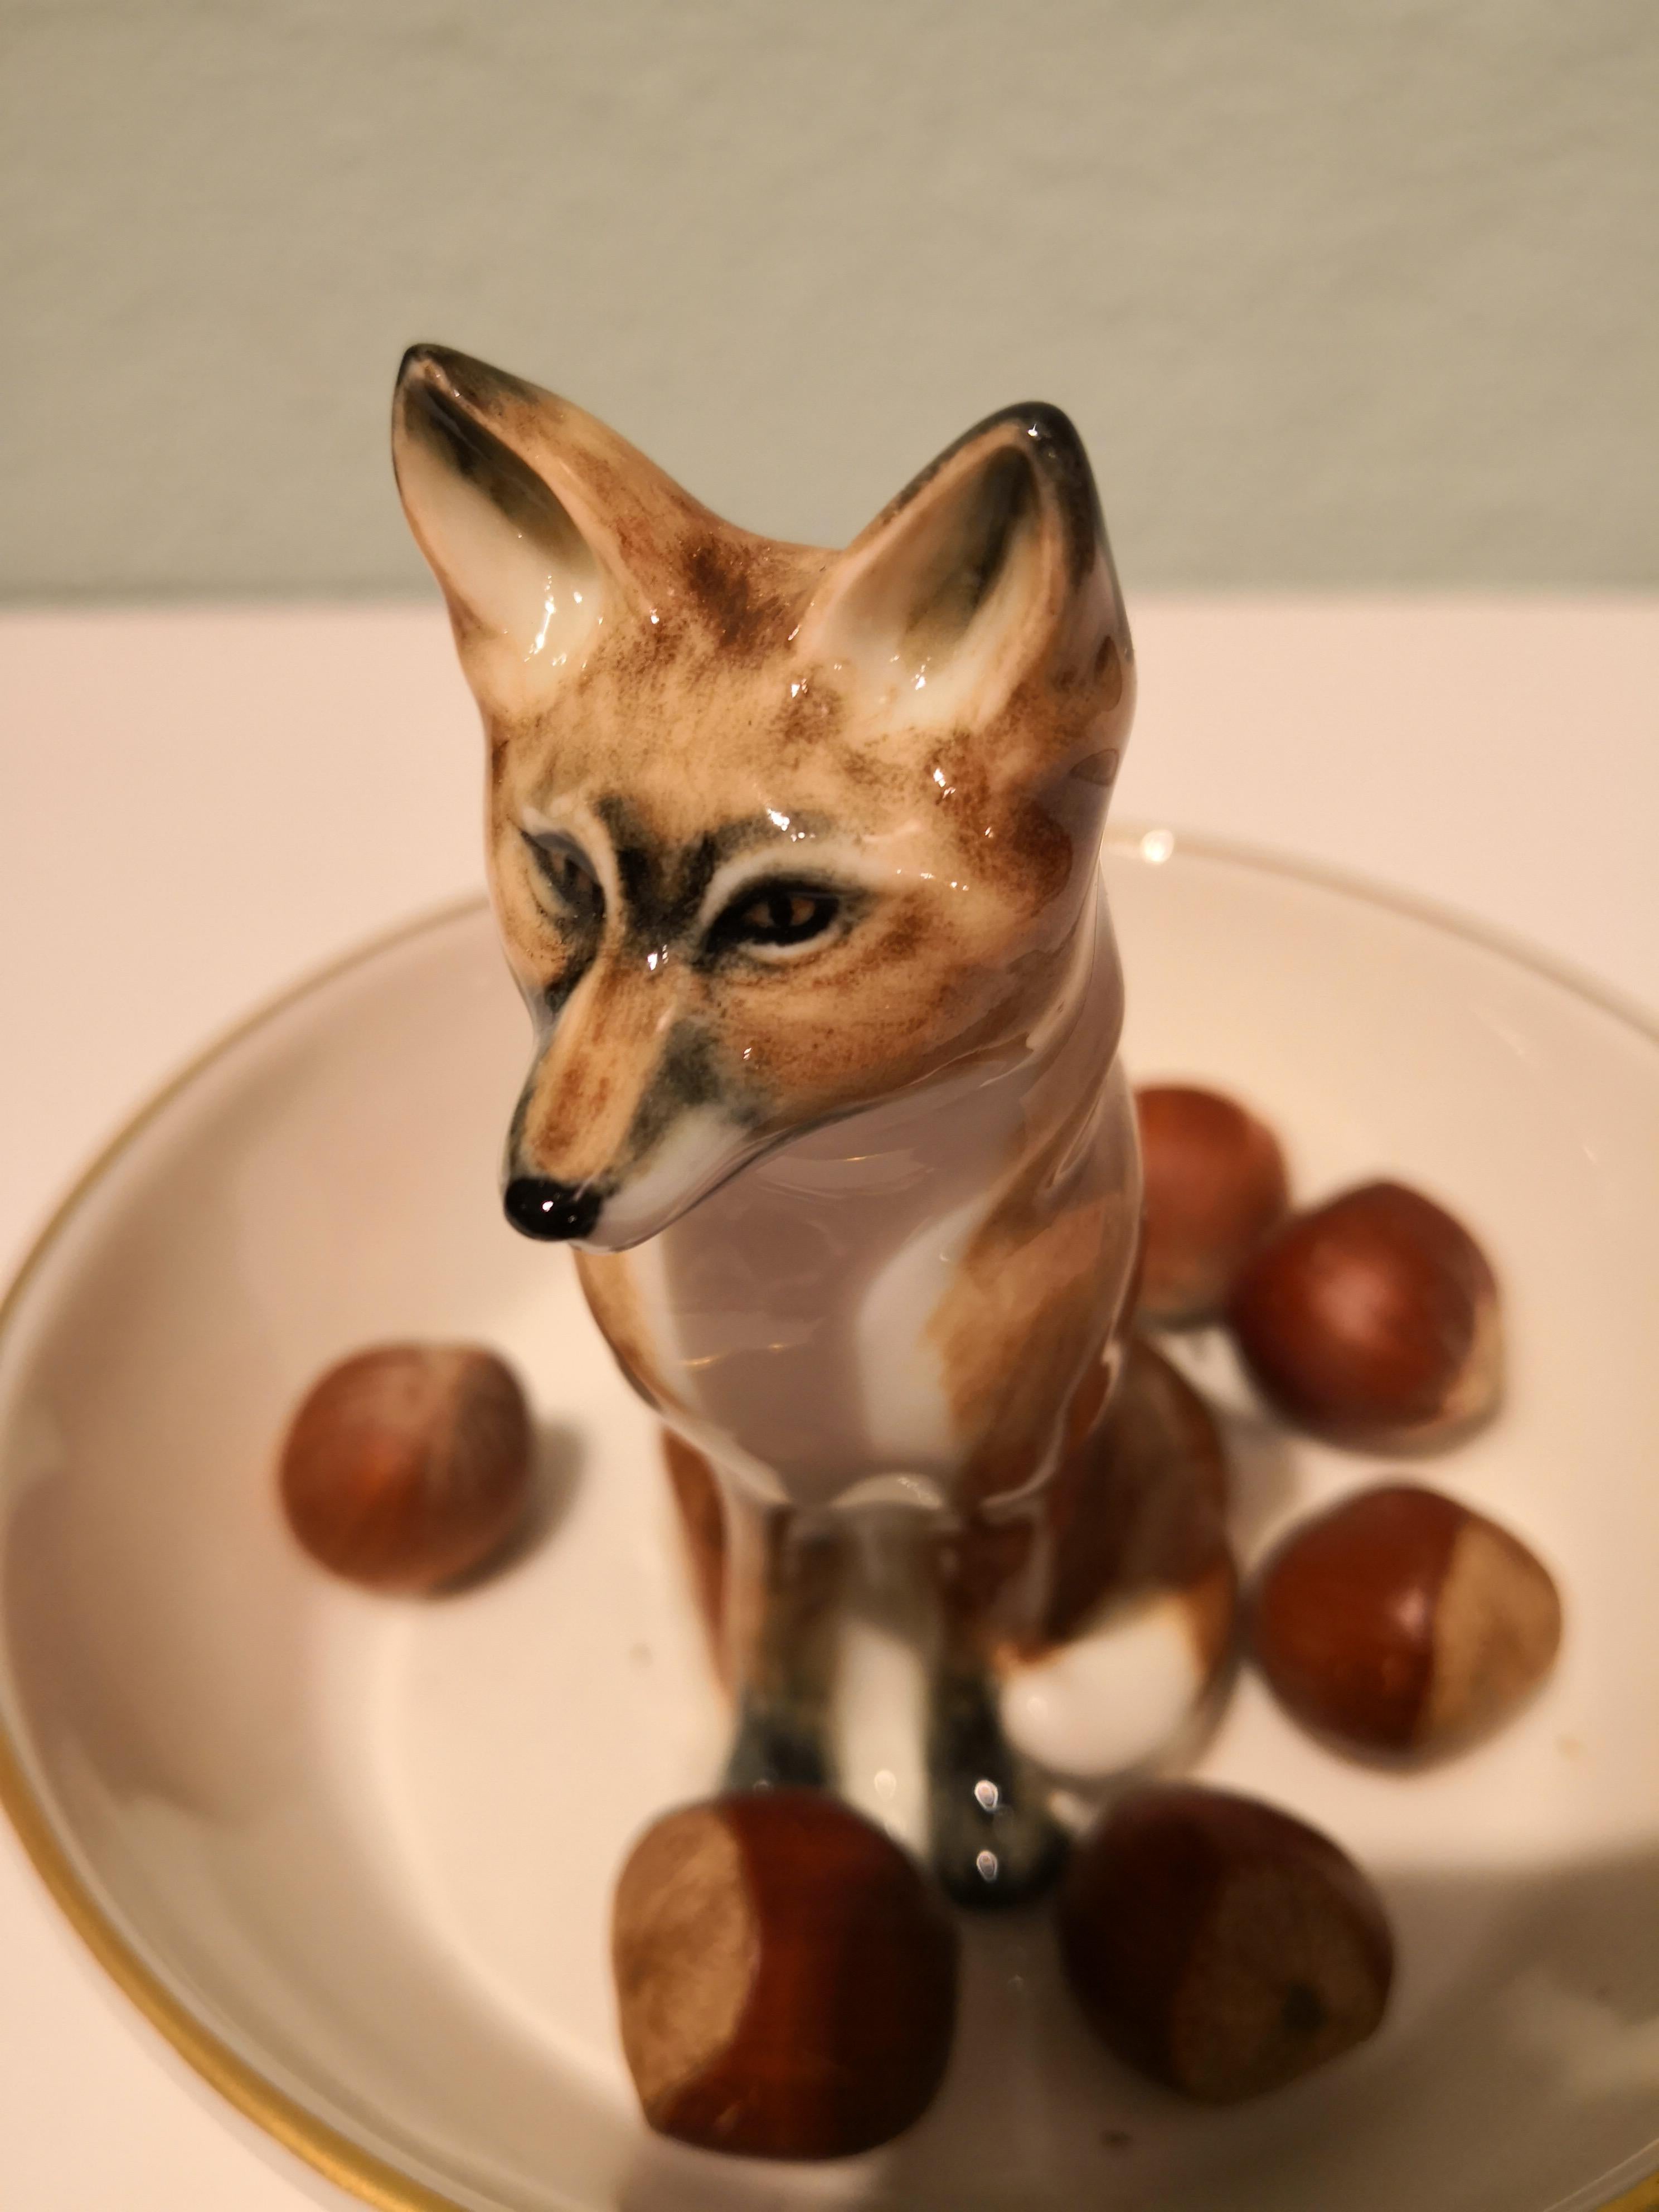 Completely handmade porcelain bowl with a hands-free natrualistic painted fox figure in brown colors. The fox is sitting in the middle of the bowl for decorating nuts or sweets around for a grerat black forest interior style. Rimmed with a fine 24